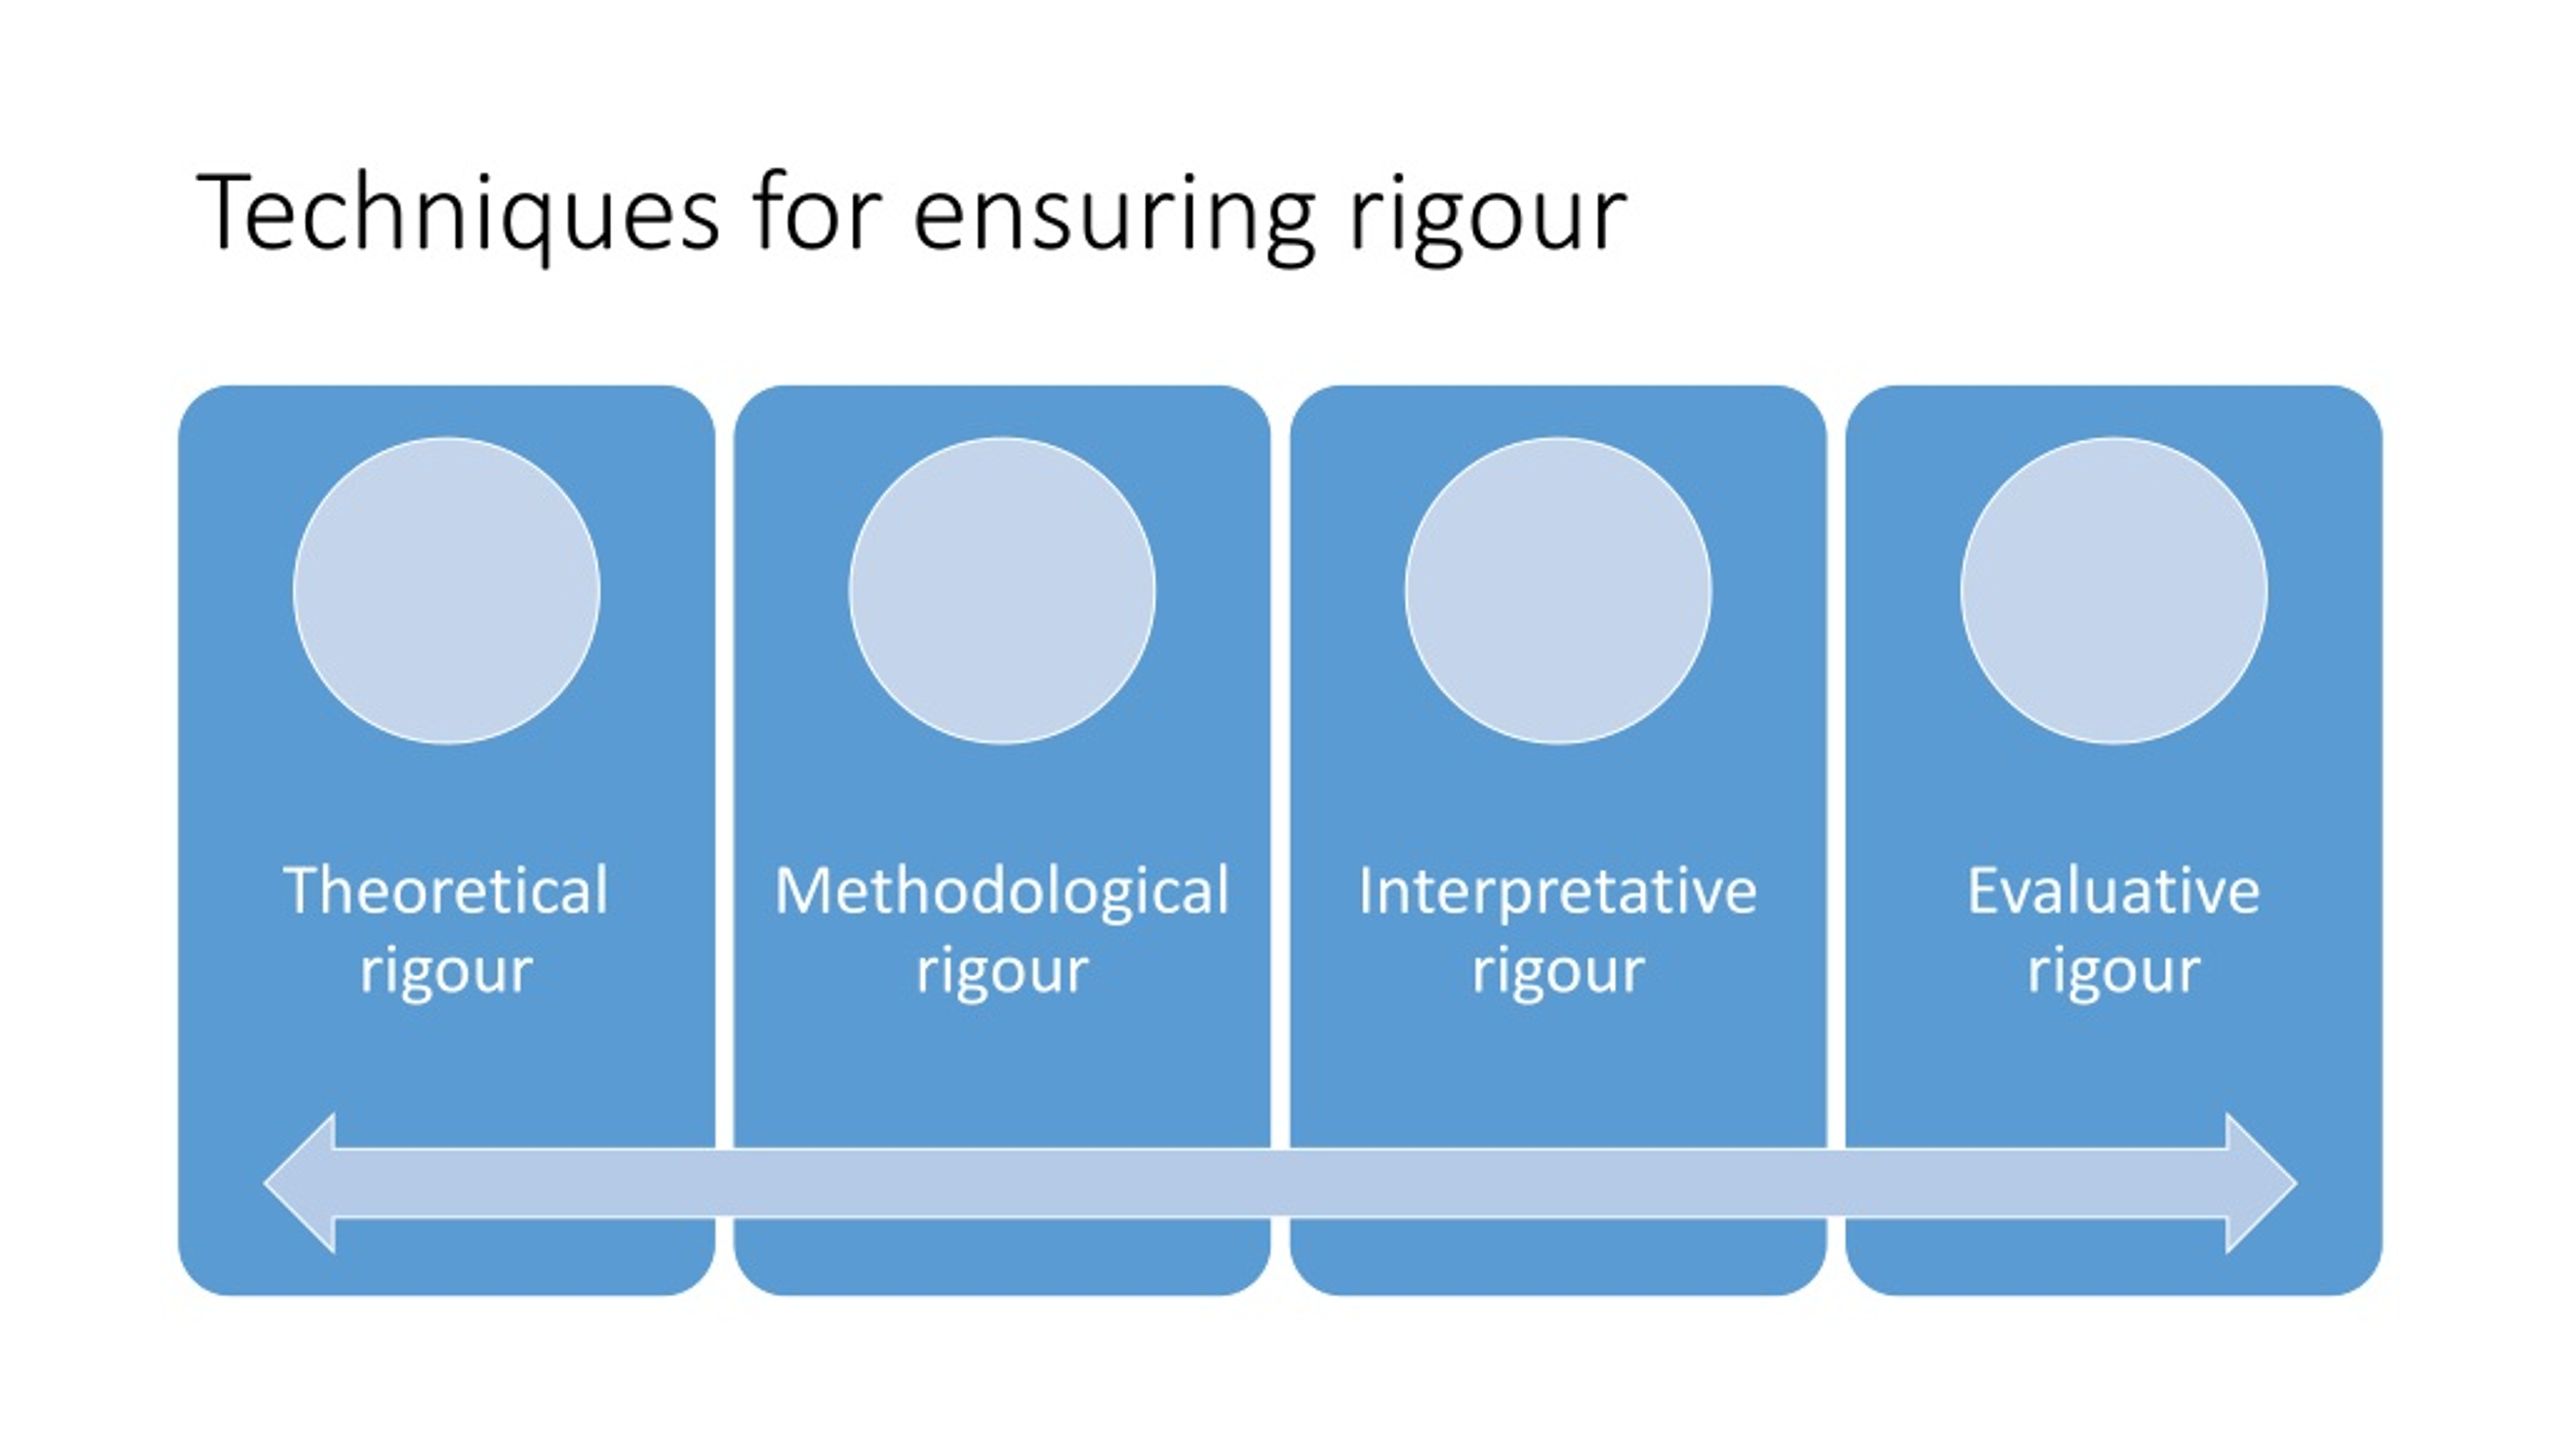 qualitative research trustworthiness and rigour